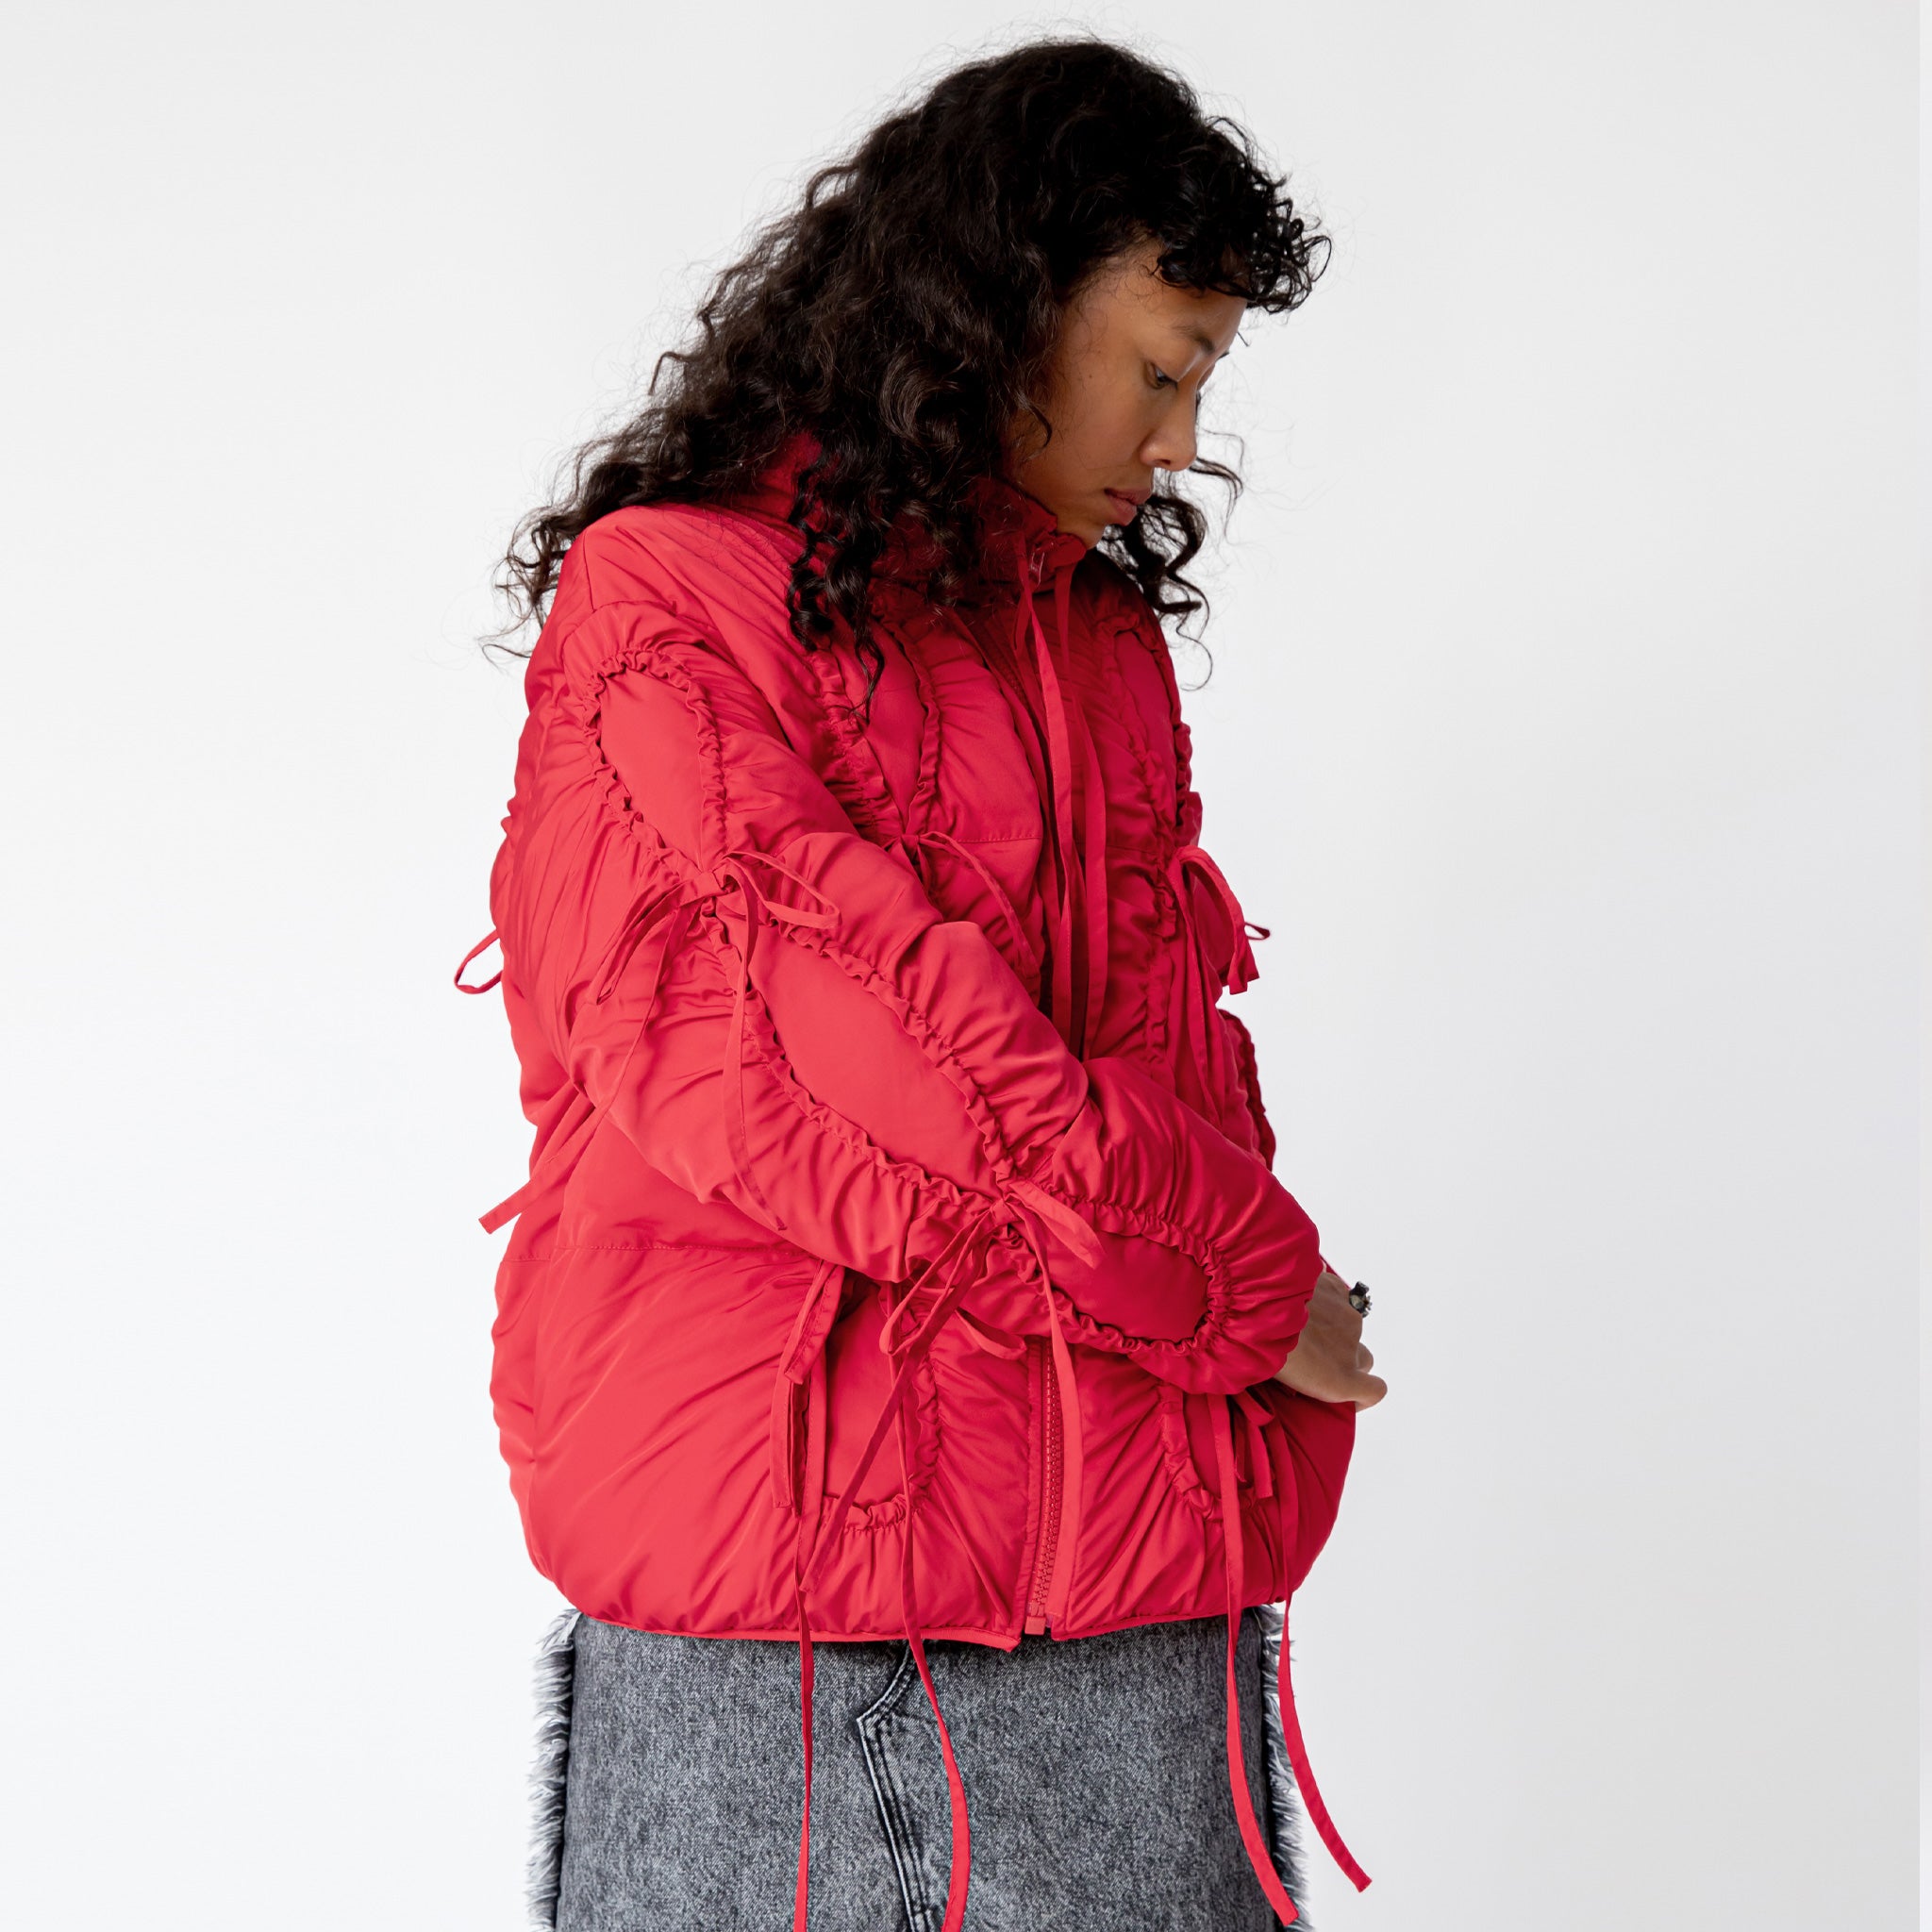 Side half body detail photo of model wearing a red puffer jacket with ruching bow details. 